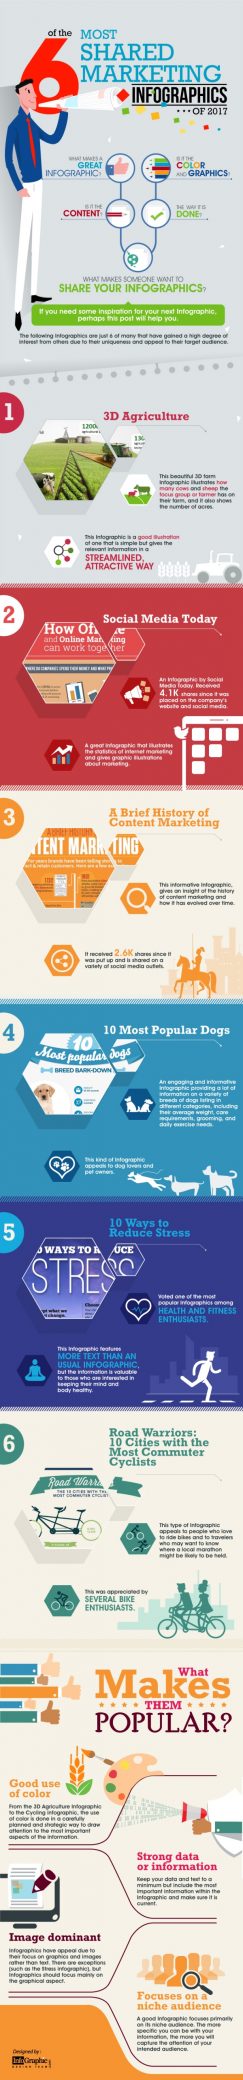 6 of the Most Shared Infographics of 2017 [Infographic]